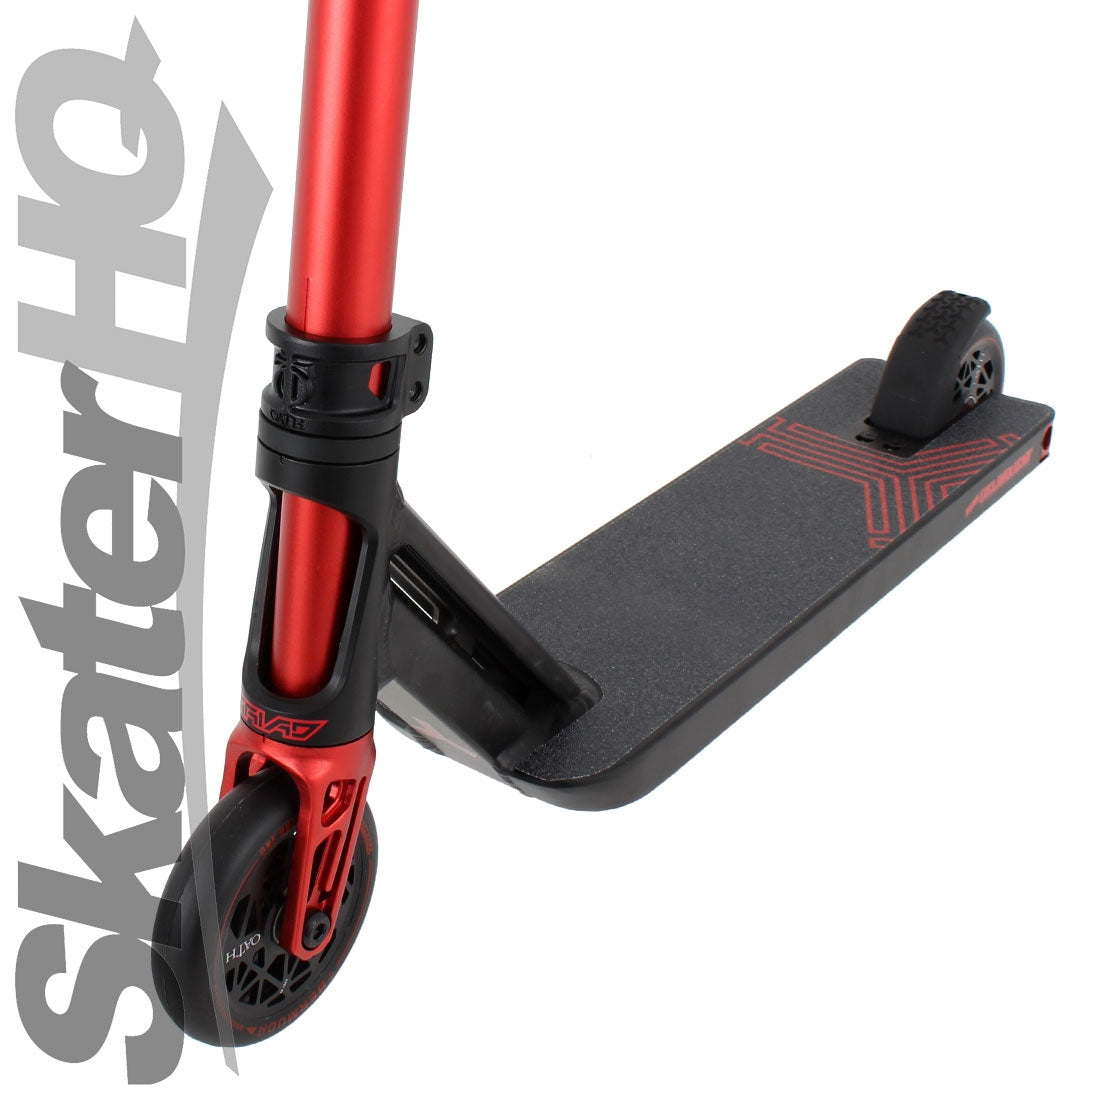 Triad Delinquent Mini - Black/Red Scooter Completes Trick